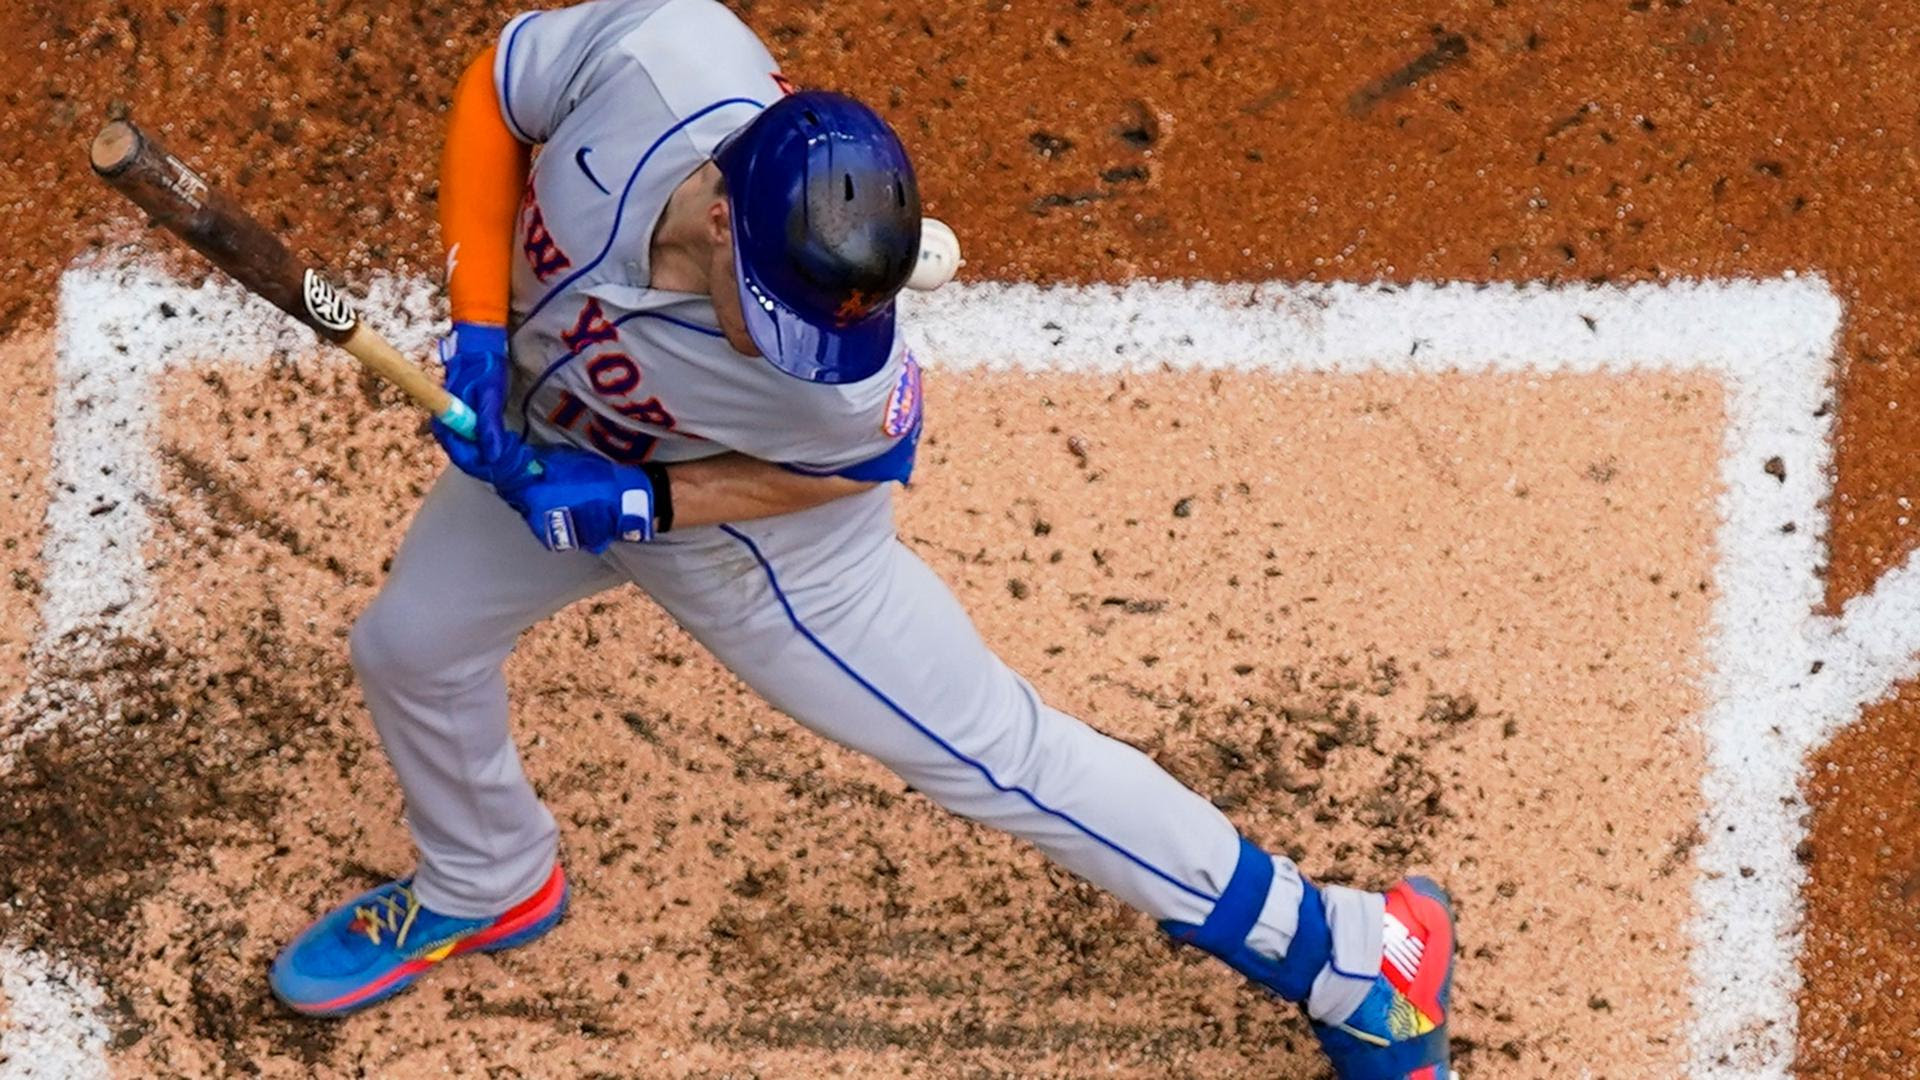 An overhead view of a Mets batter being hit by a pitch